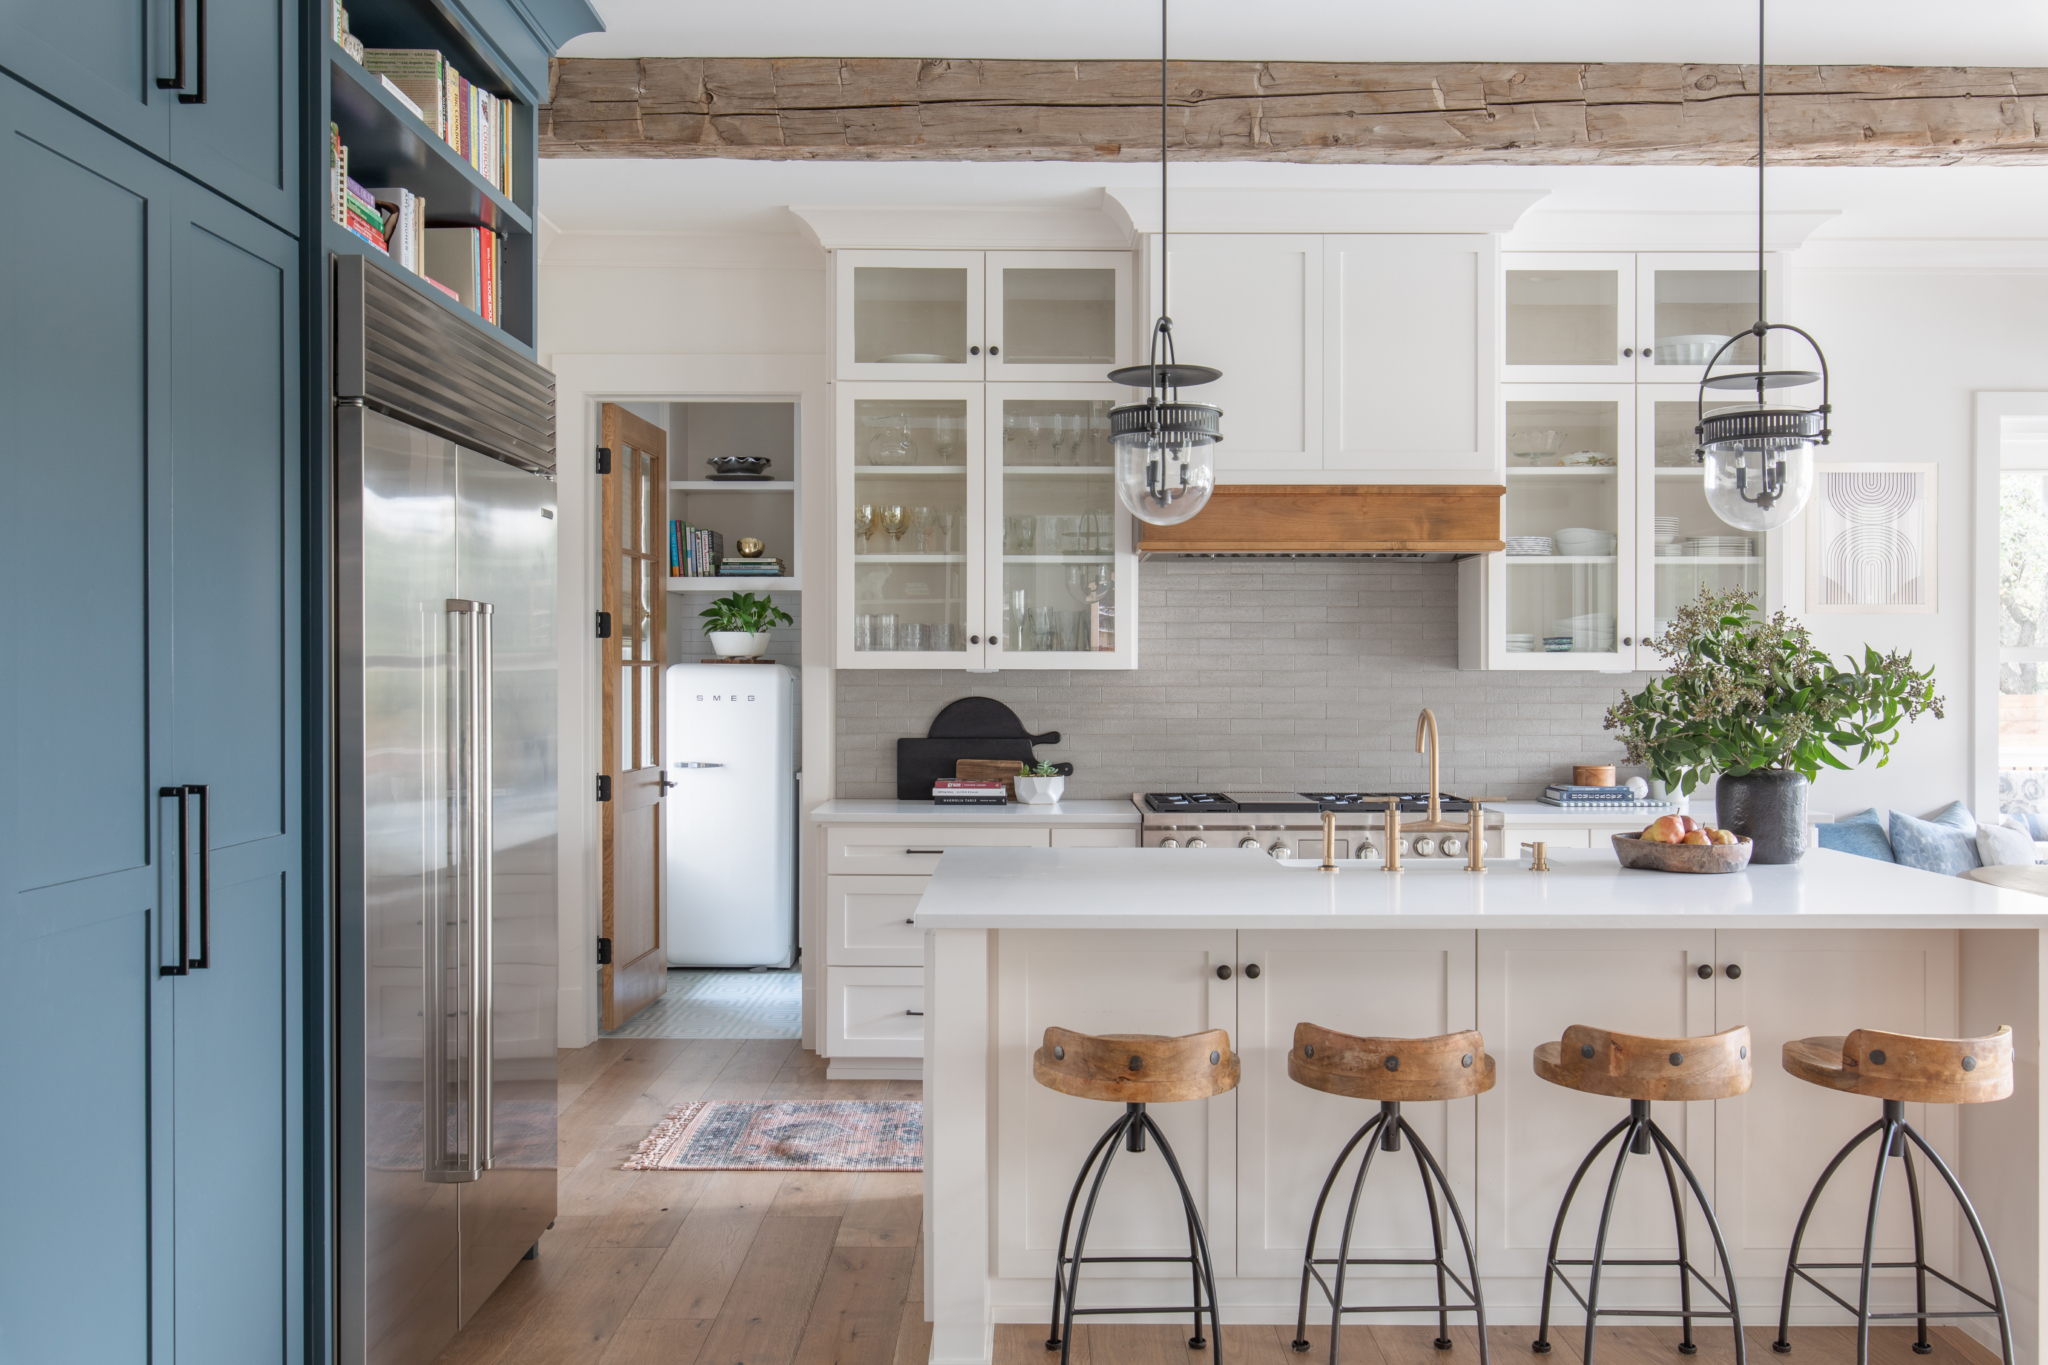 Kitchen Trends That Went Out of Style This Year: Interior Designers